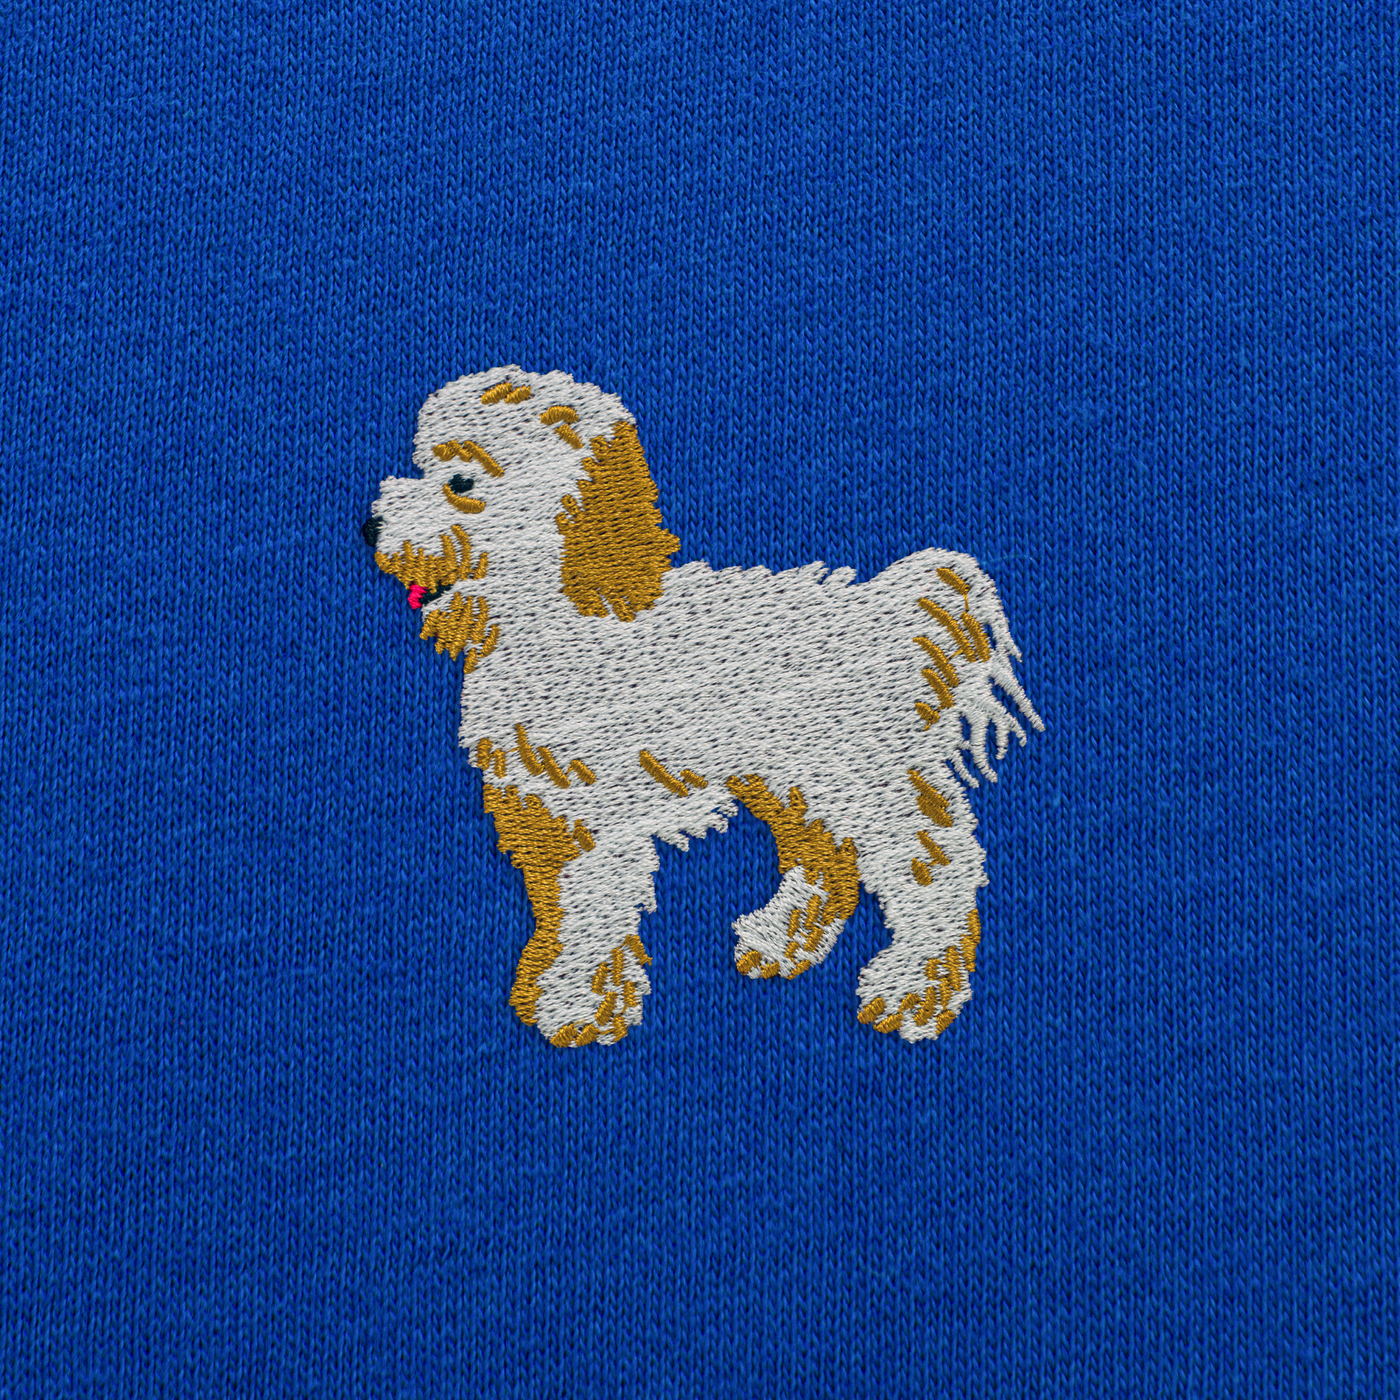 Bobby's Planet Kids Embroidered Poodle T-Shirt from Bobbys Planet Toy Poodle Collection in True Royal Color#color_true-royal